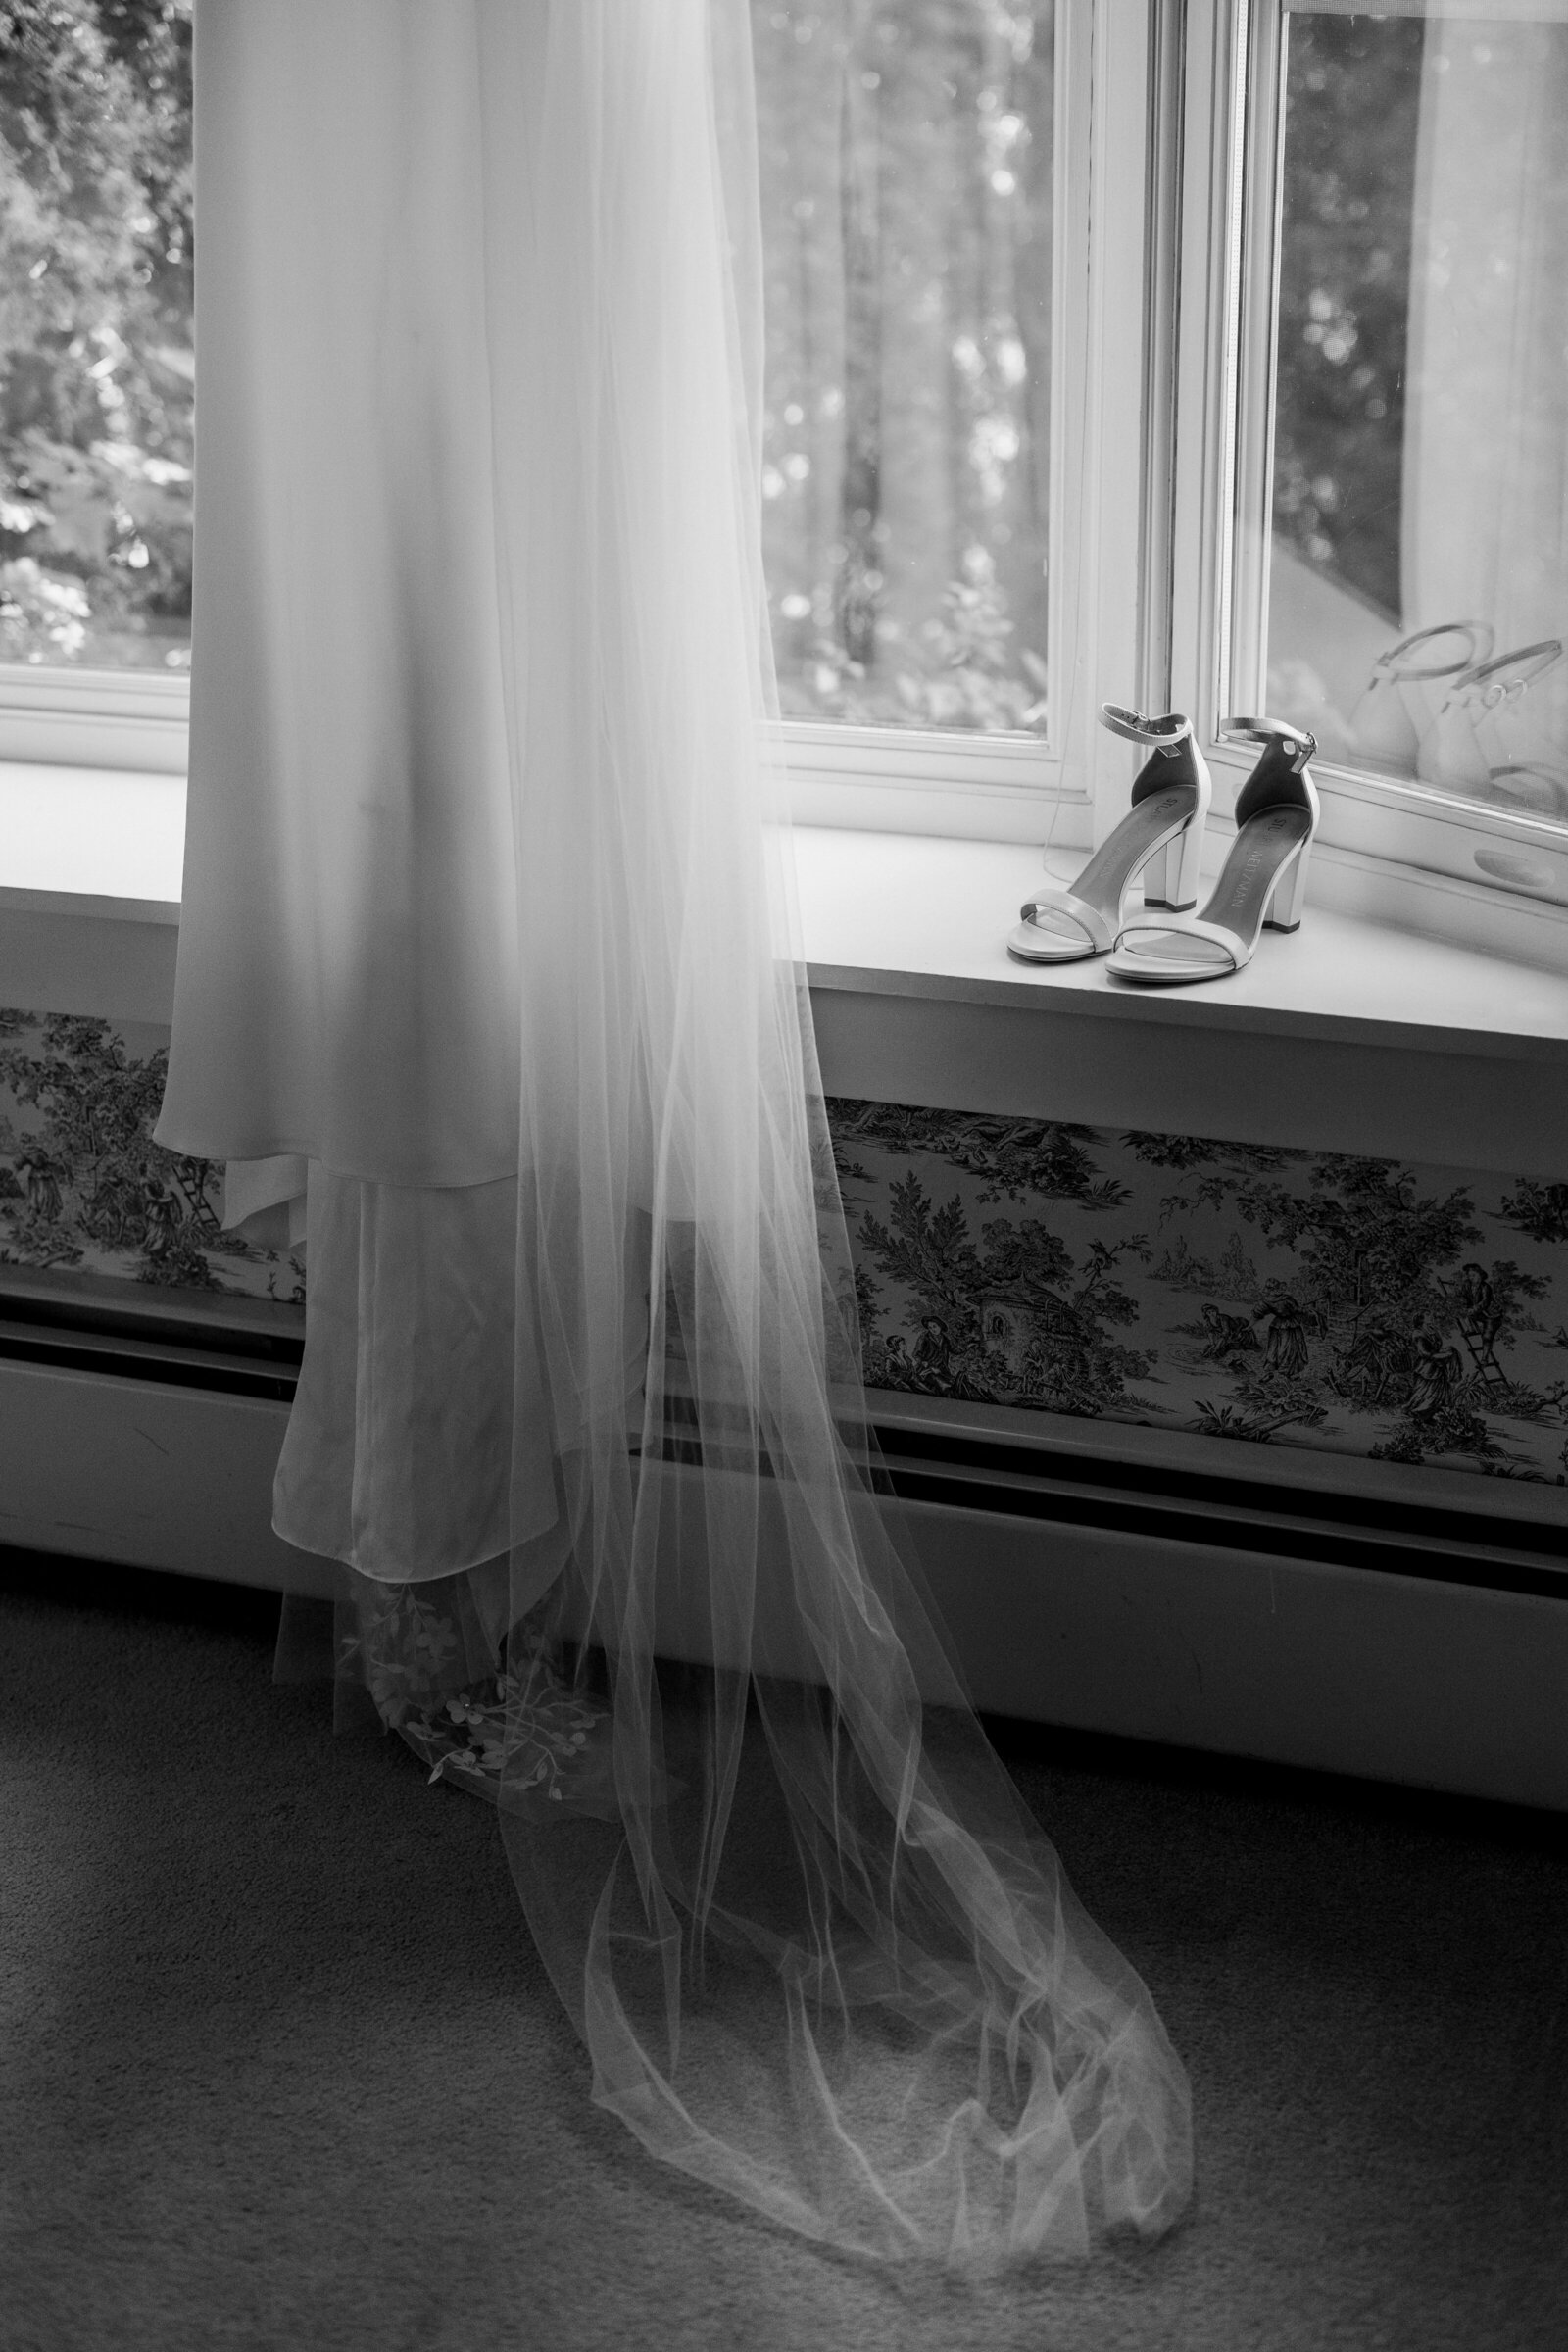 Black and white photo of heels sitting on a nook by a window with a wedding dress hanging next to them.